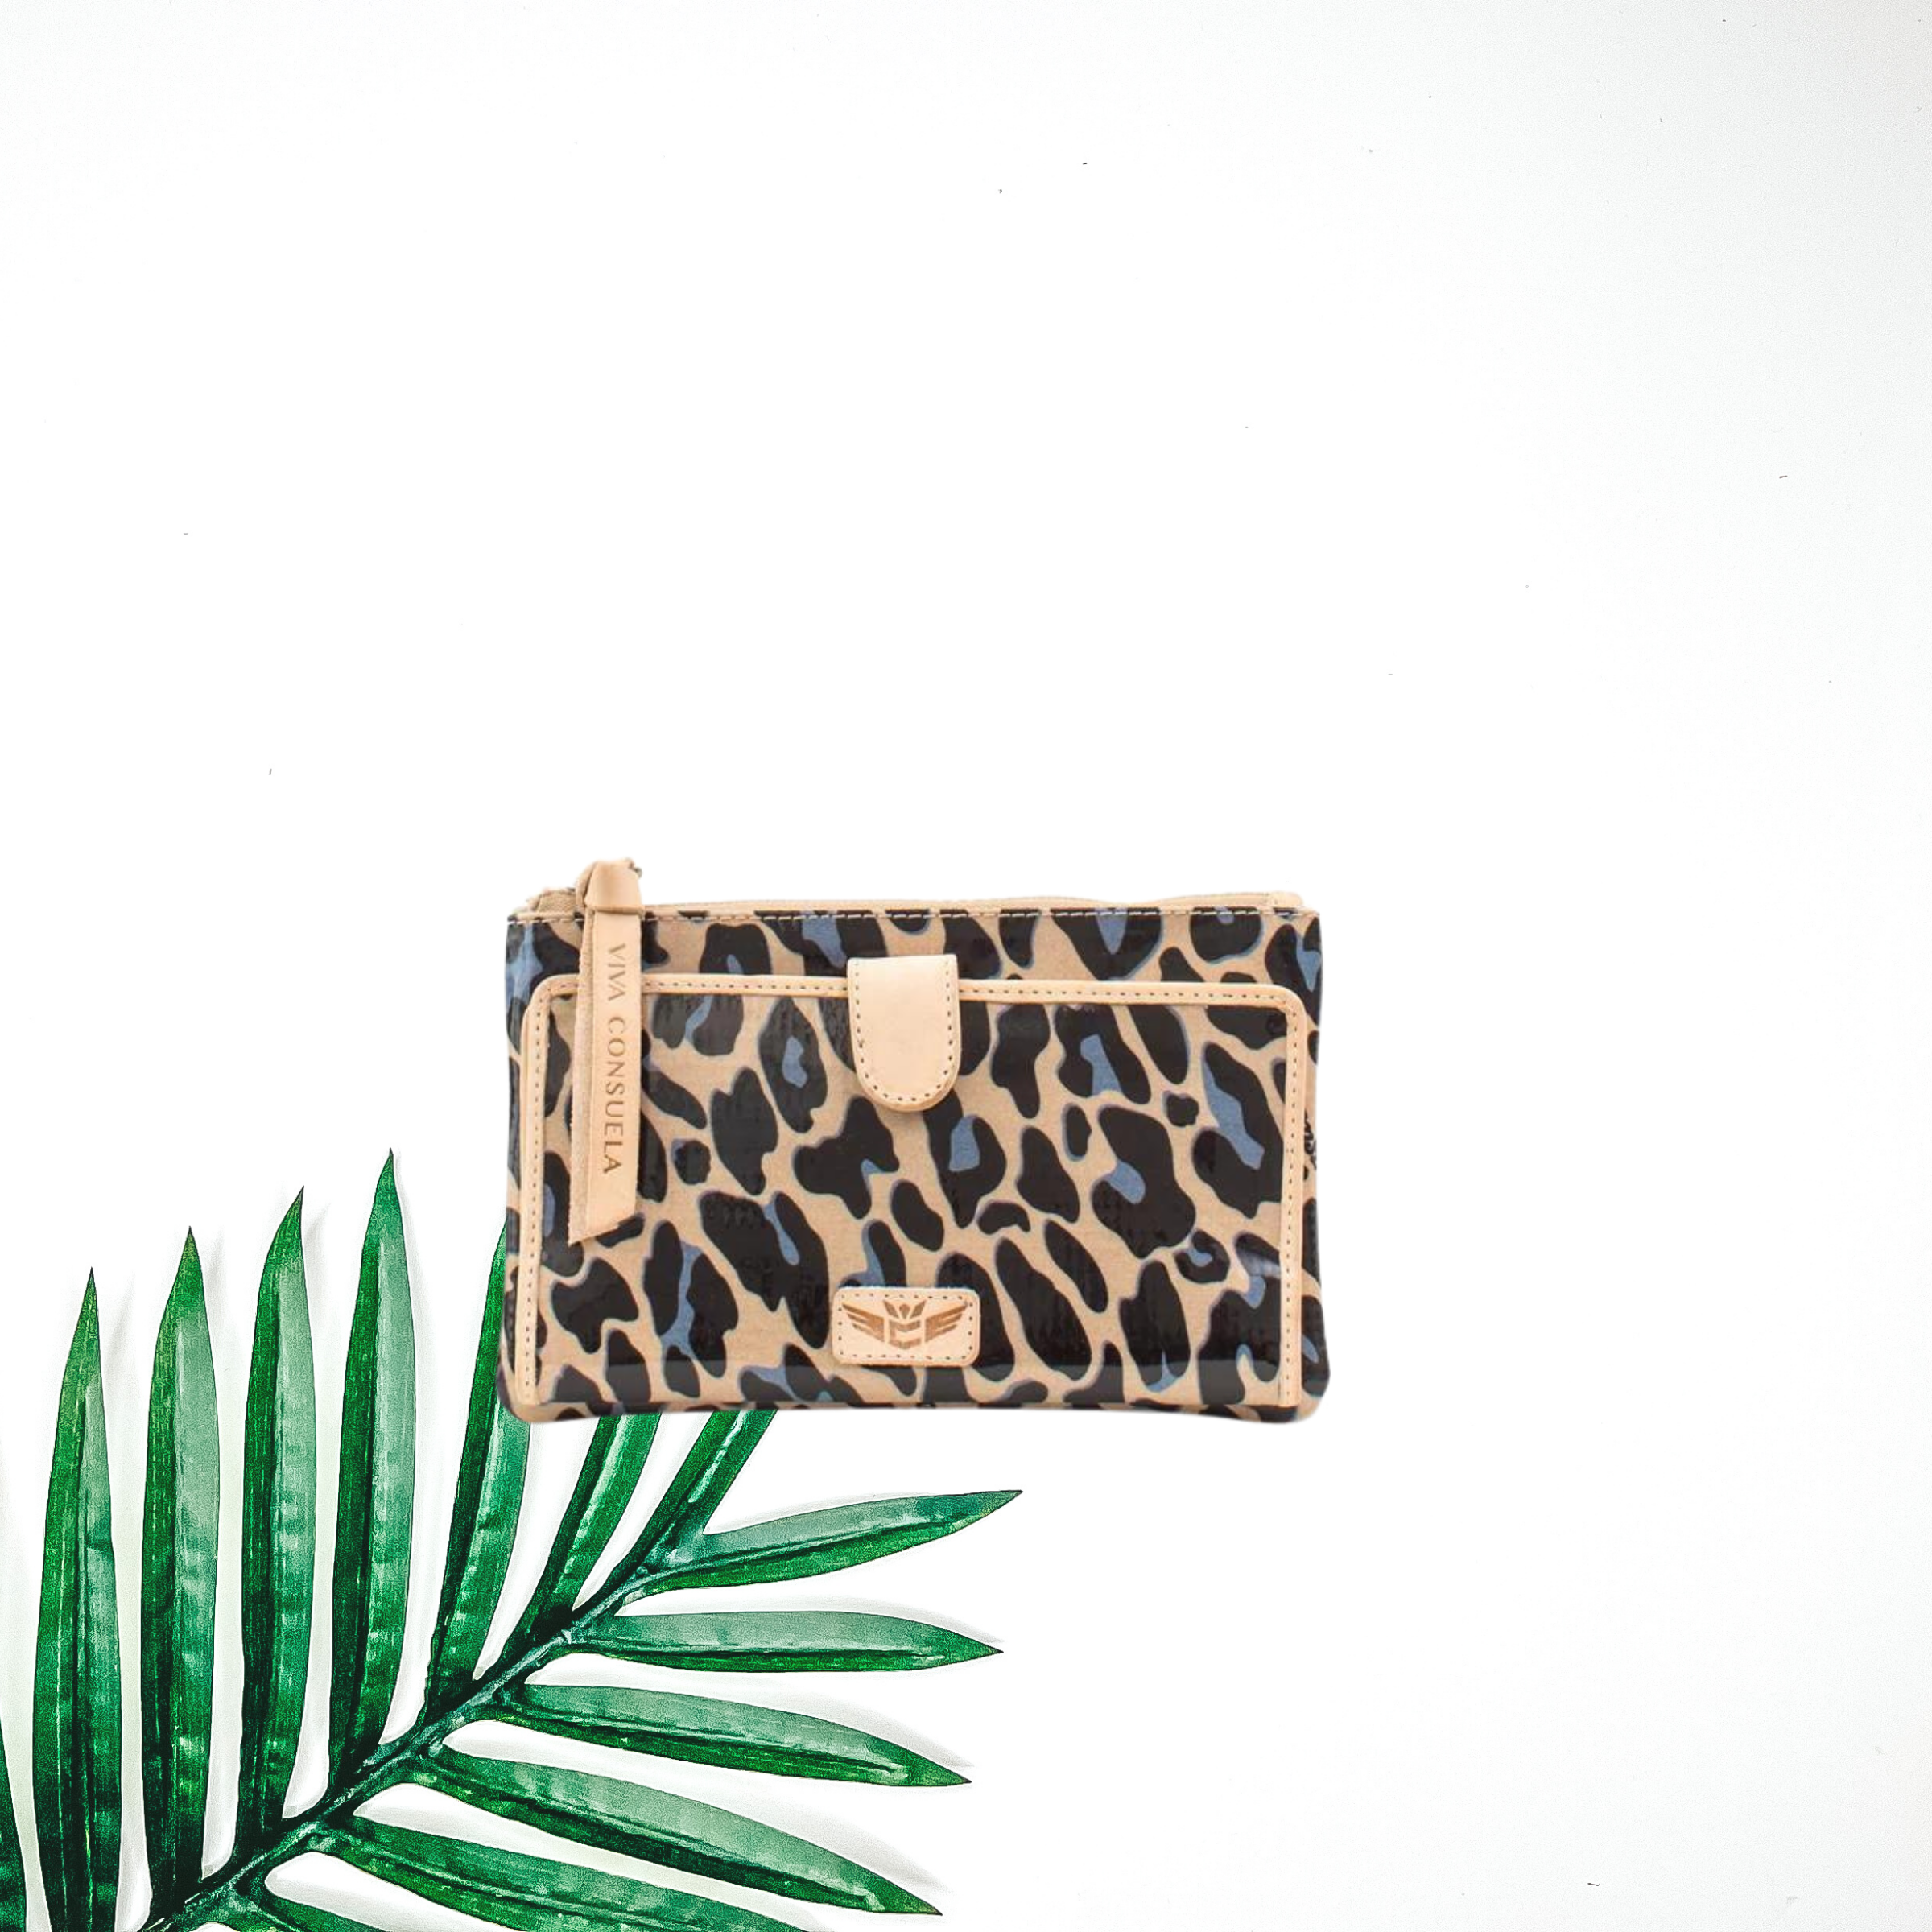 Centered is a cheetah print slim wallet with blue accents. To the right of the wallet is a palm leaf, all on a white background. 